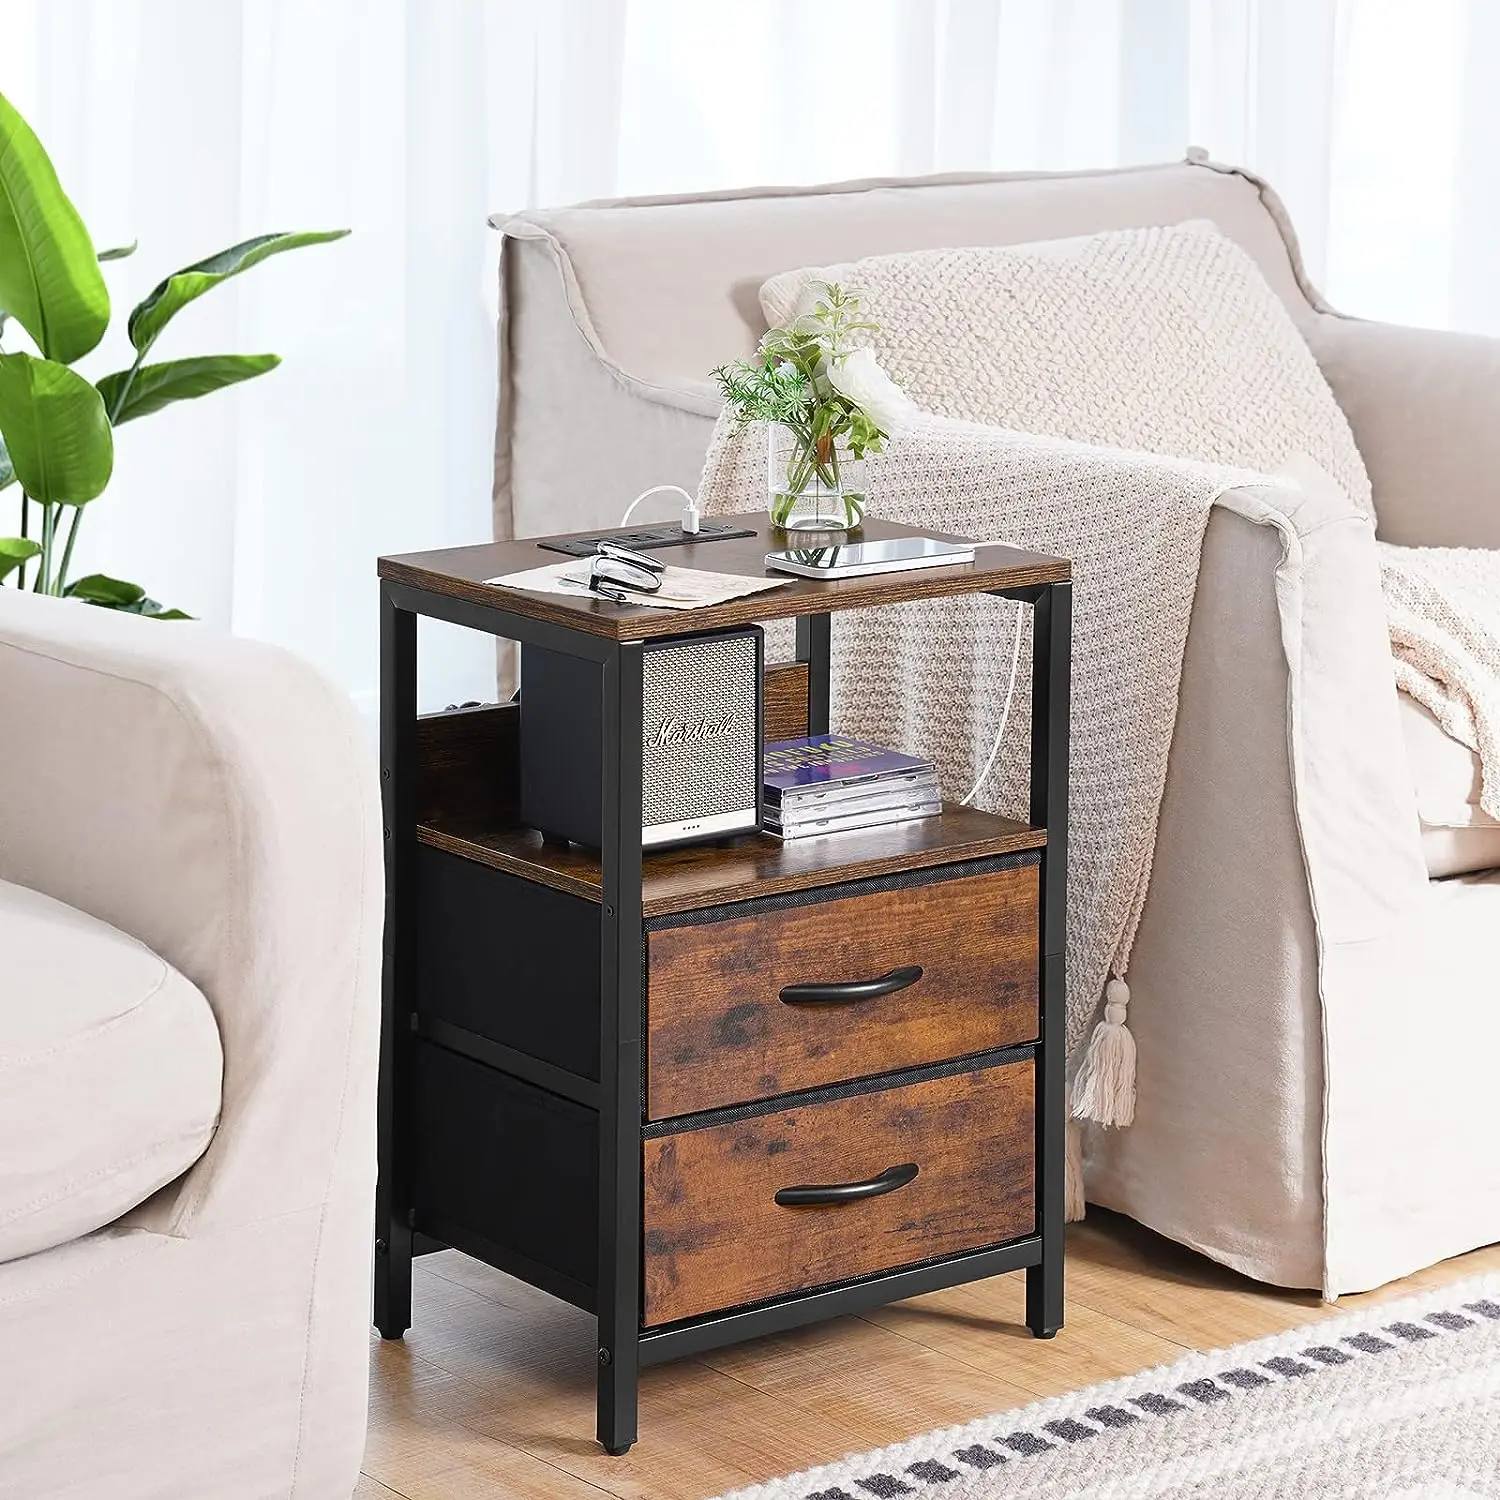 YQ Wholesale Drawers Shelves Entryway Storage Stable Metal Frame Living Room Storage Cabinet Furniture for Living Room